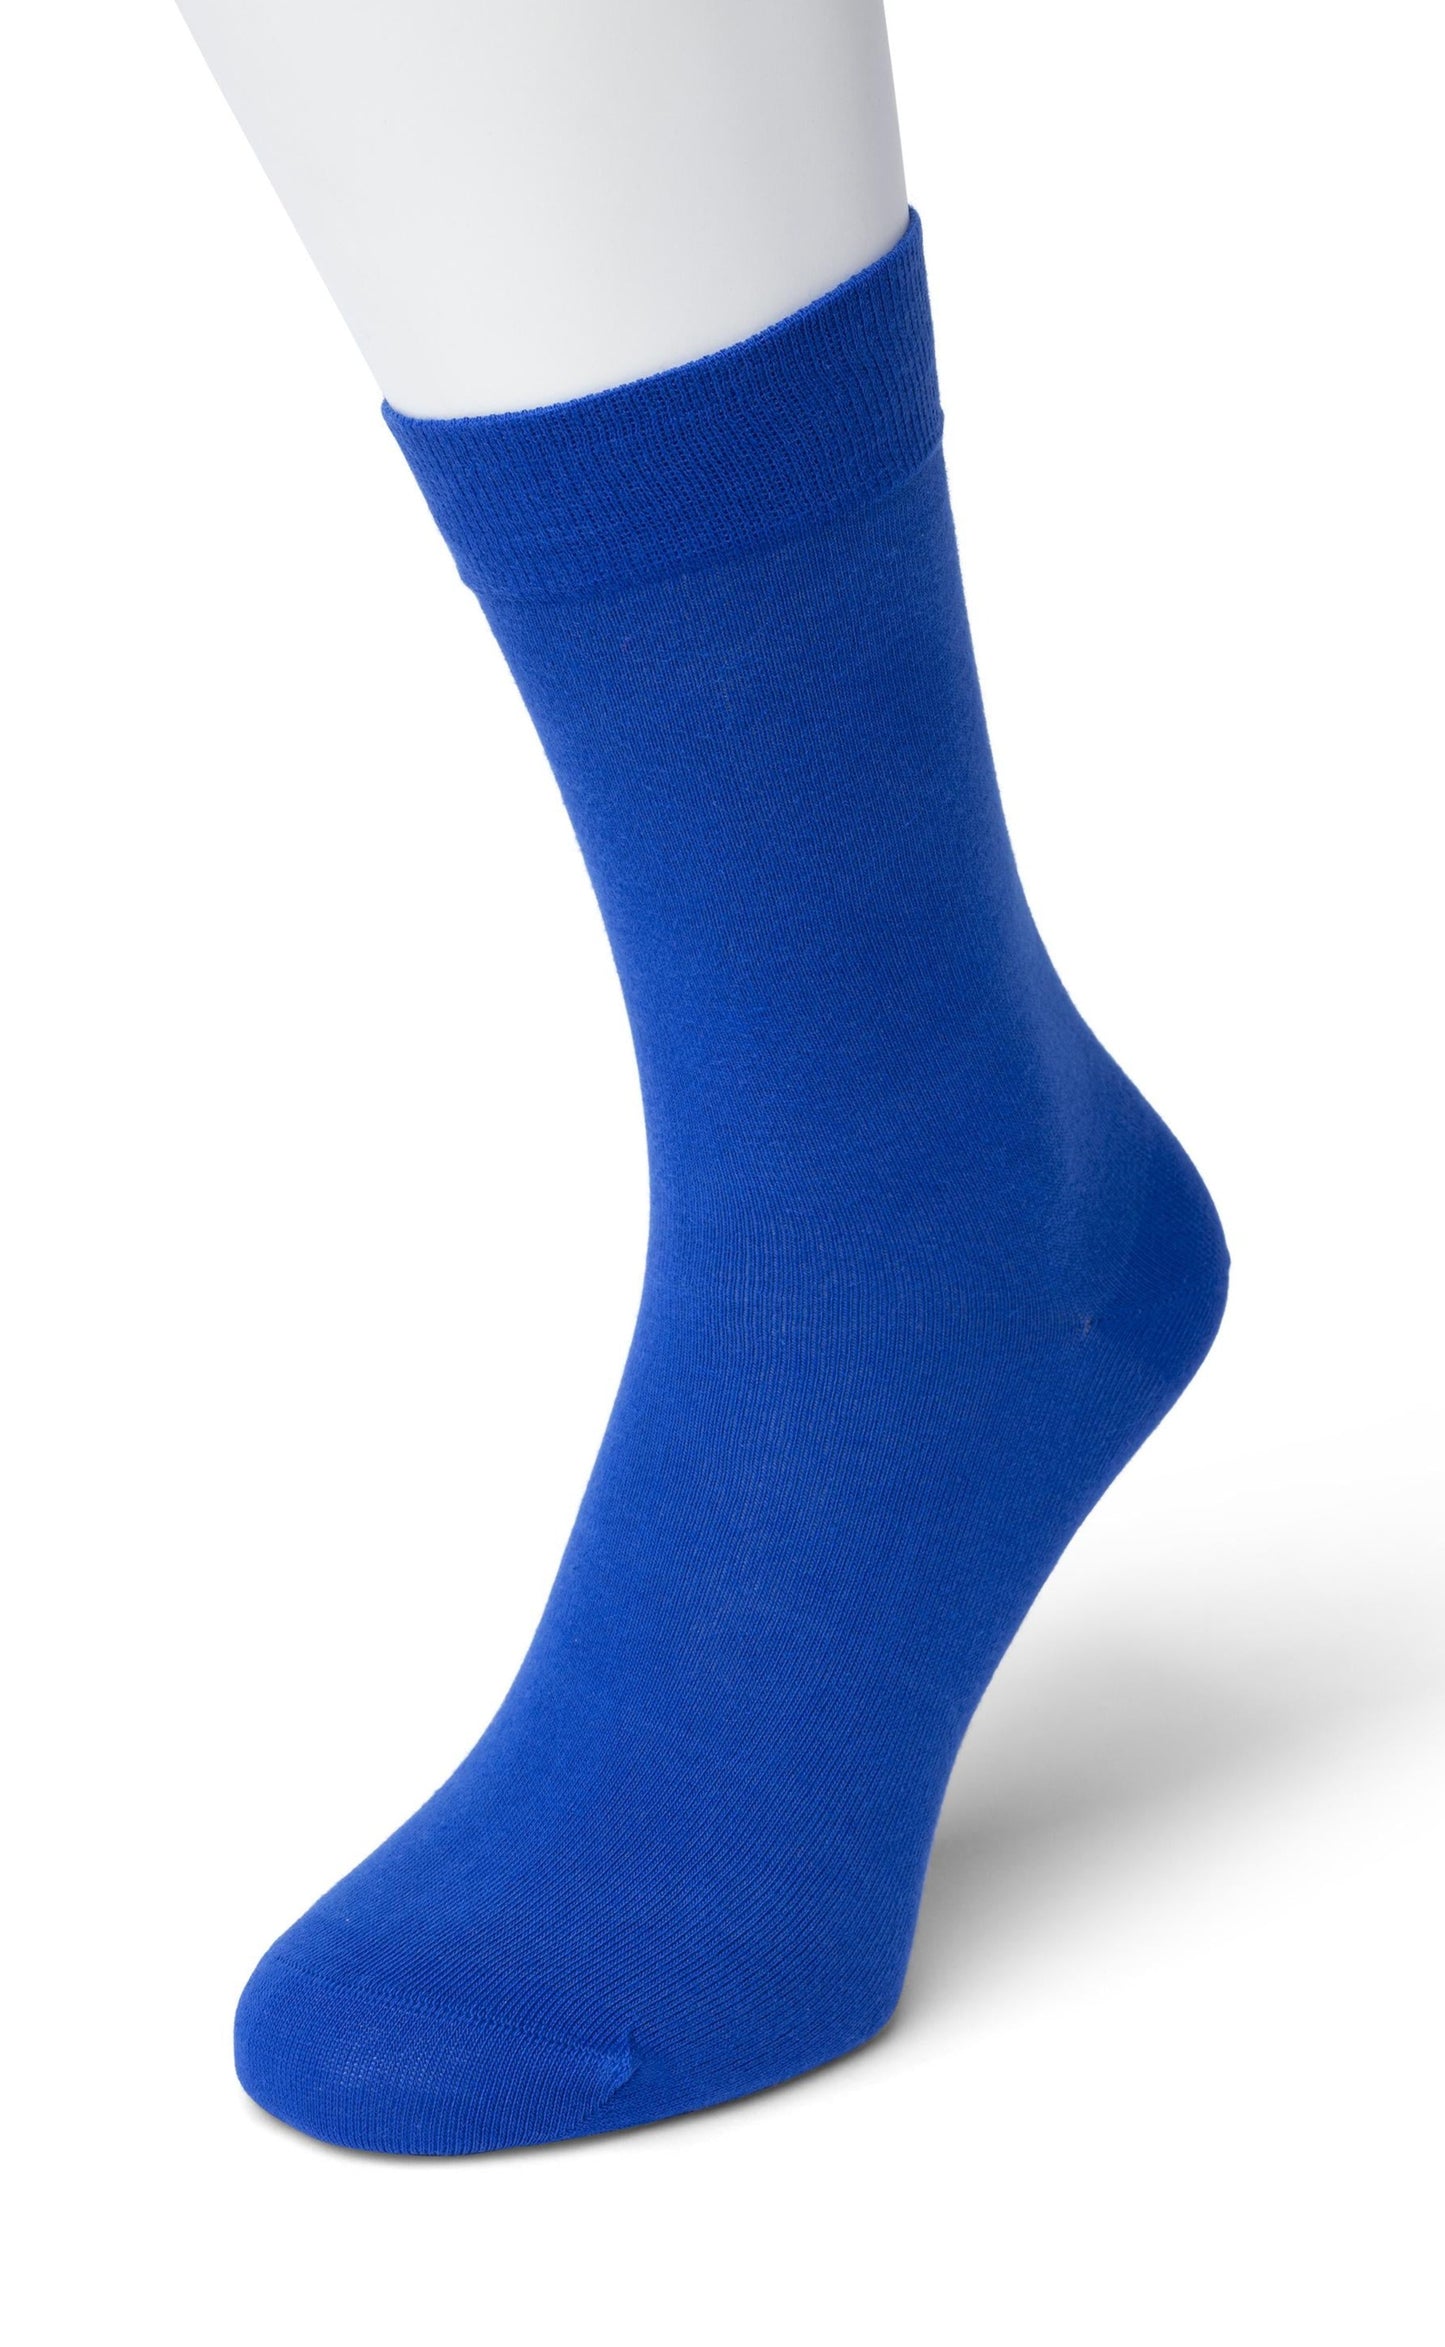 Bonnie Doon 83422 / BD632401 Cotton Sock -  Dark Royal Blue / Cobalt ankle socks available in men and women sizes